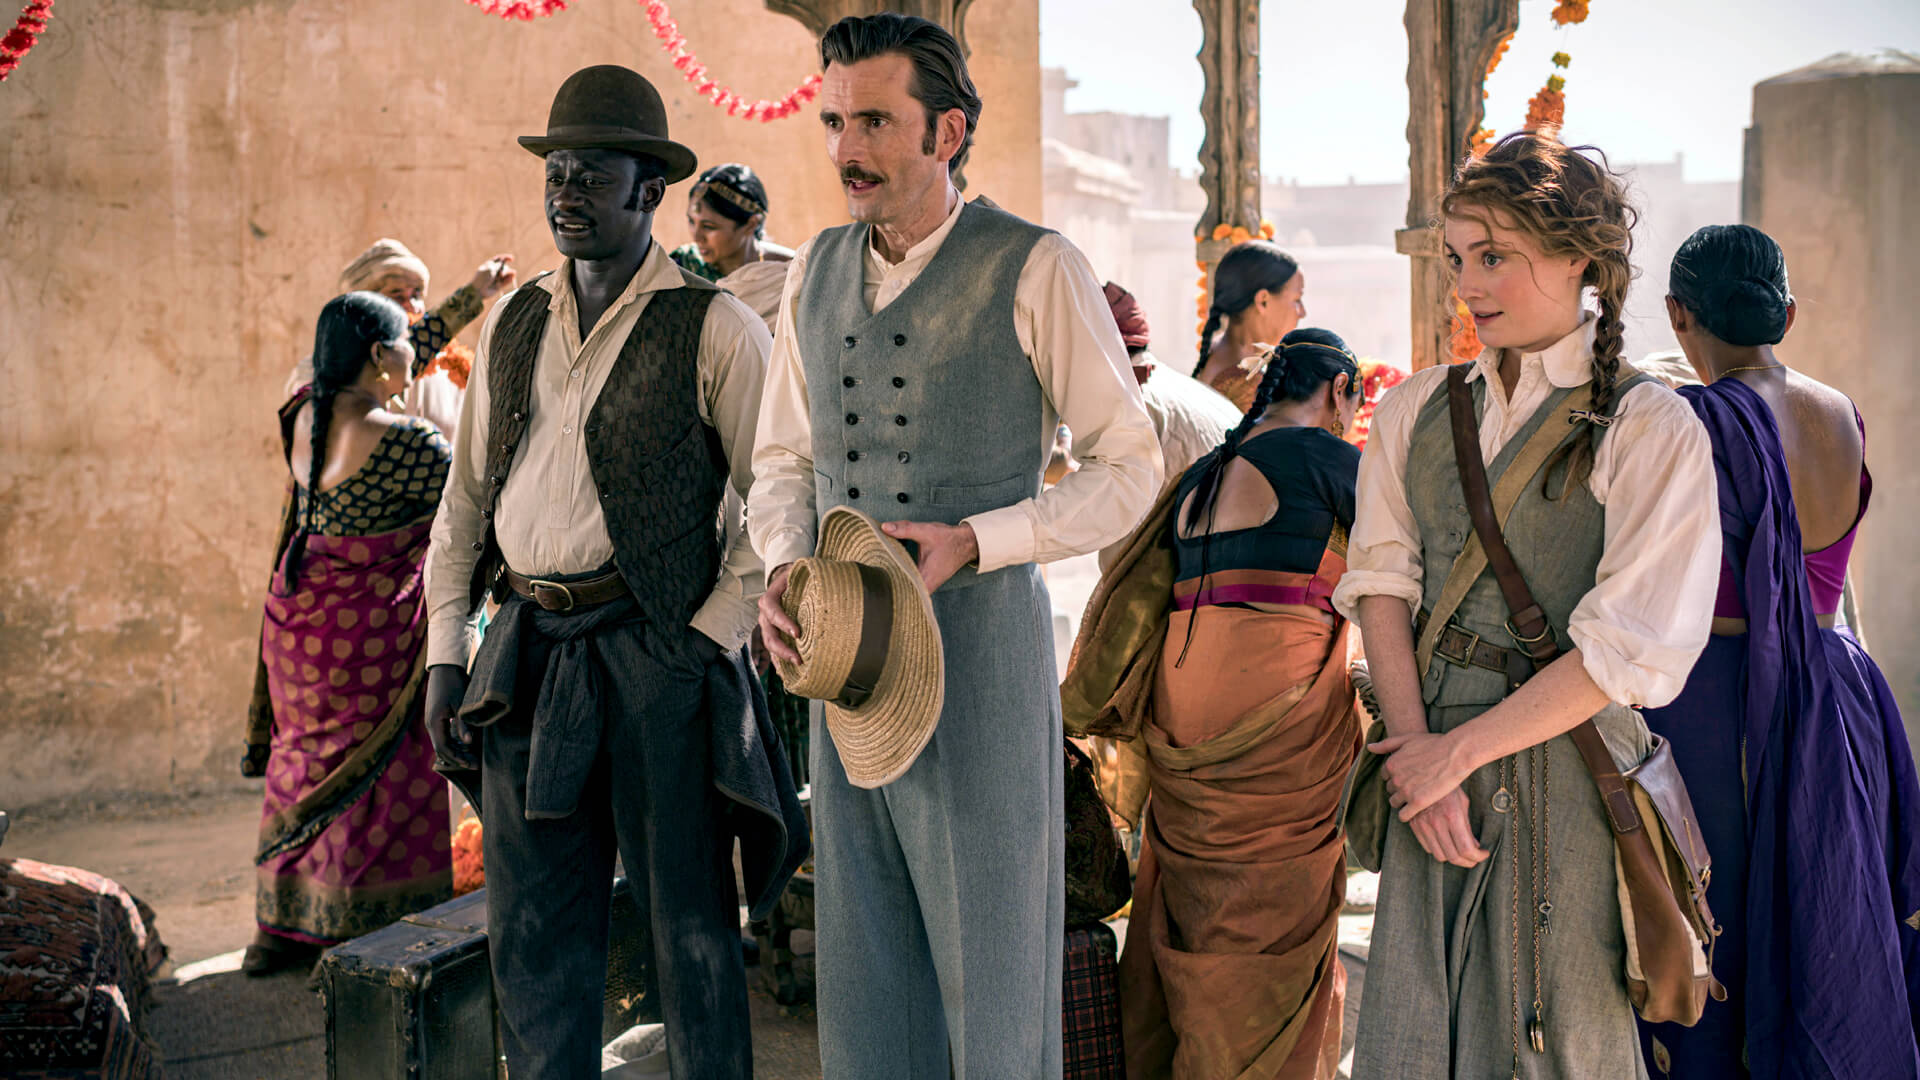 Actors Ibrahim Koma, David Tennant, Leonie Benesch (left to right) in a scene from Around the World in 80 Days on PBS MASTERPIECE.